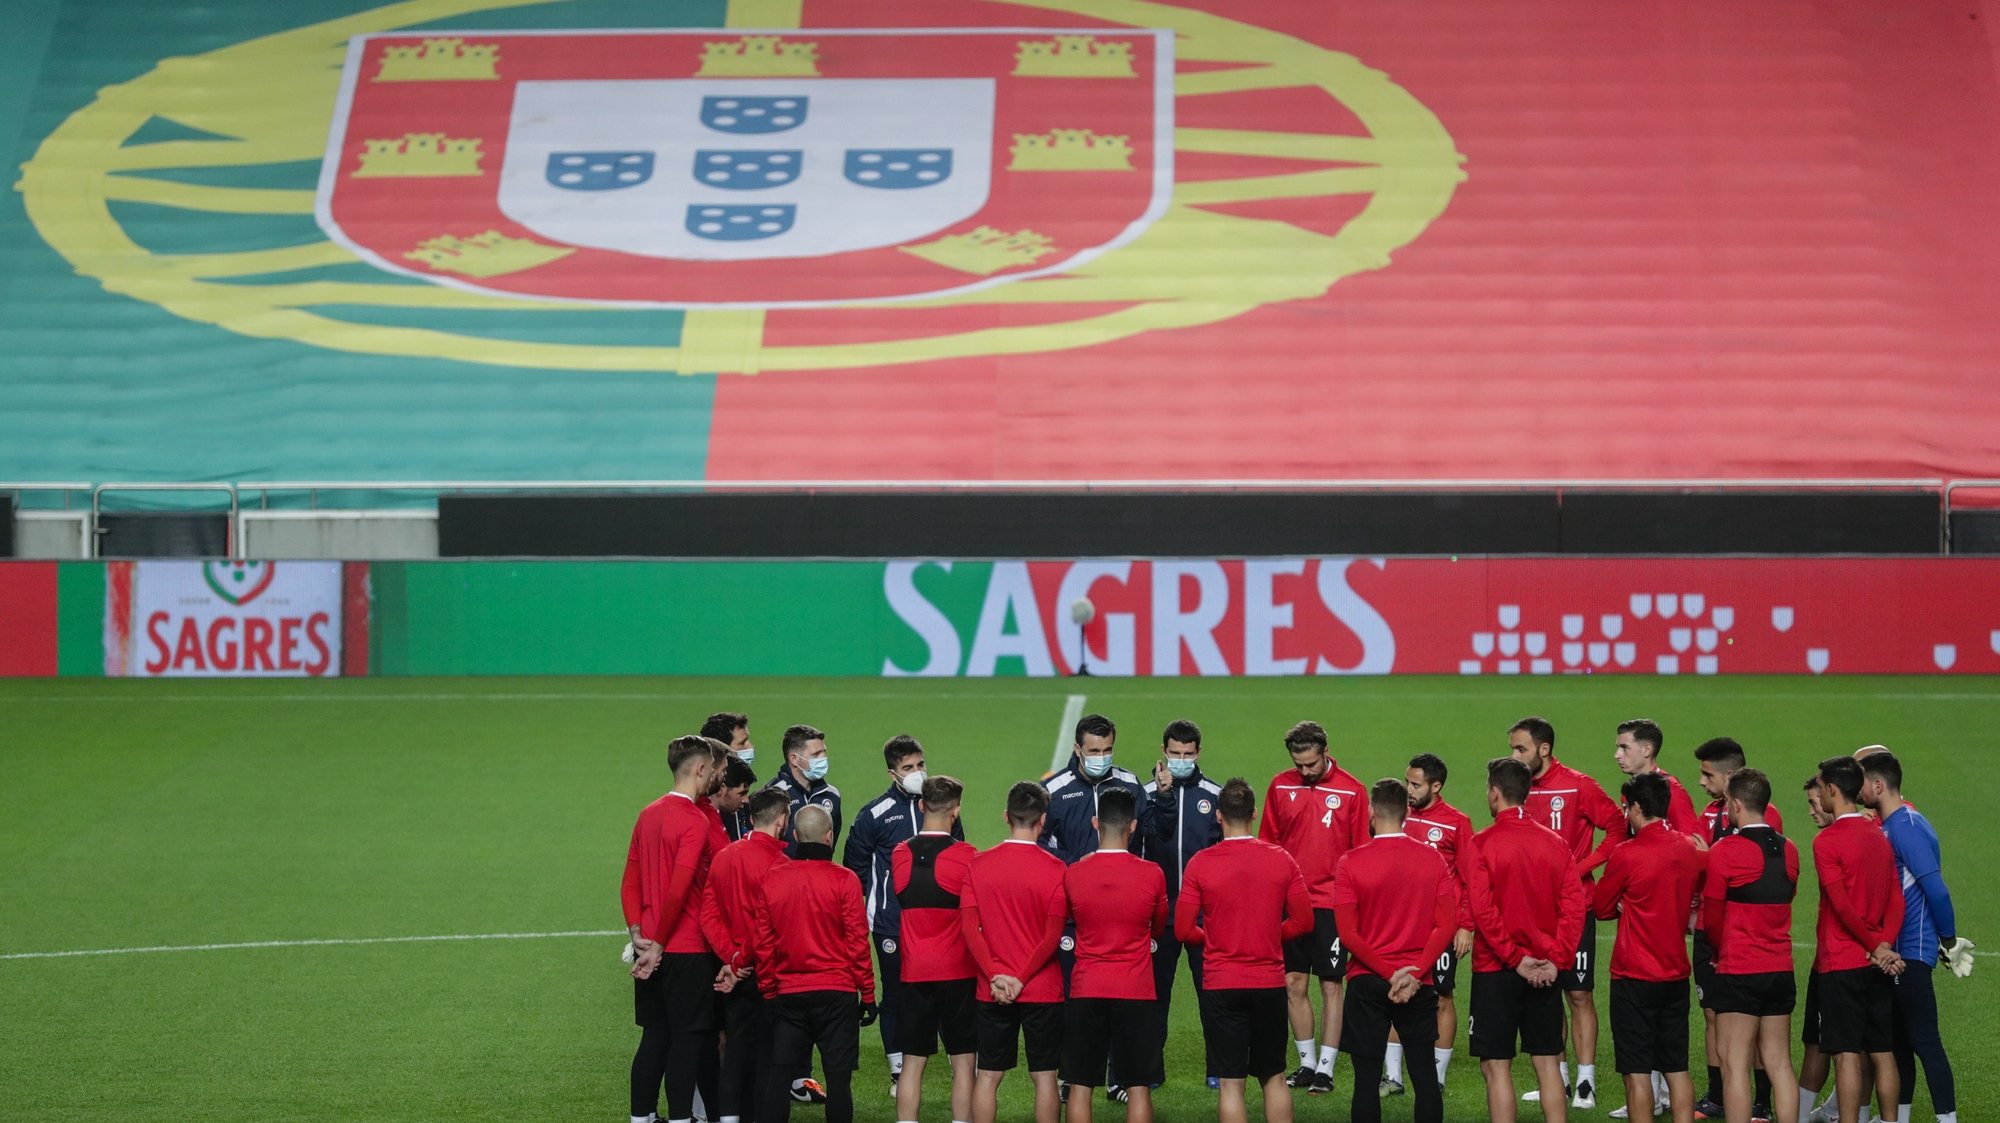 Andorra&#039;s national soccer team headcoach Koldo Alvarez giving instructions to his players during the training session of his team on the Luz stadium in Lisbon, Portugal, 10th November 2020. Andorra&#039;s playing tomorrow against Portugal on a friendly match. TIAGO PETINGA/LUSA